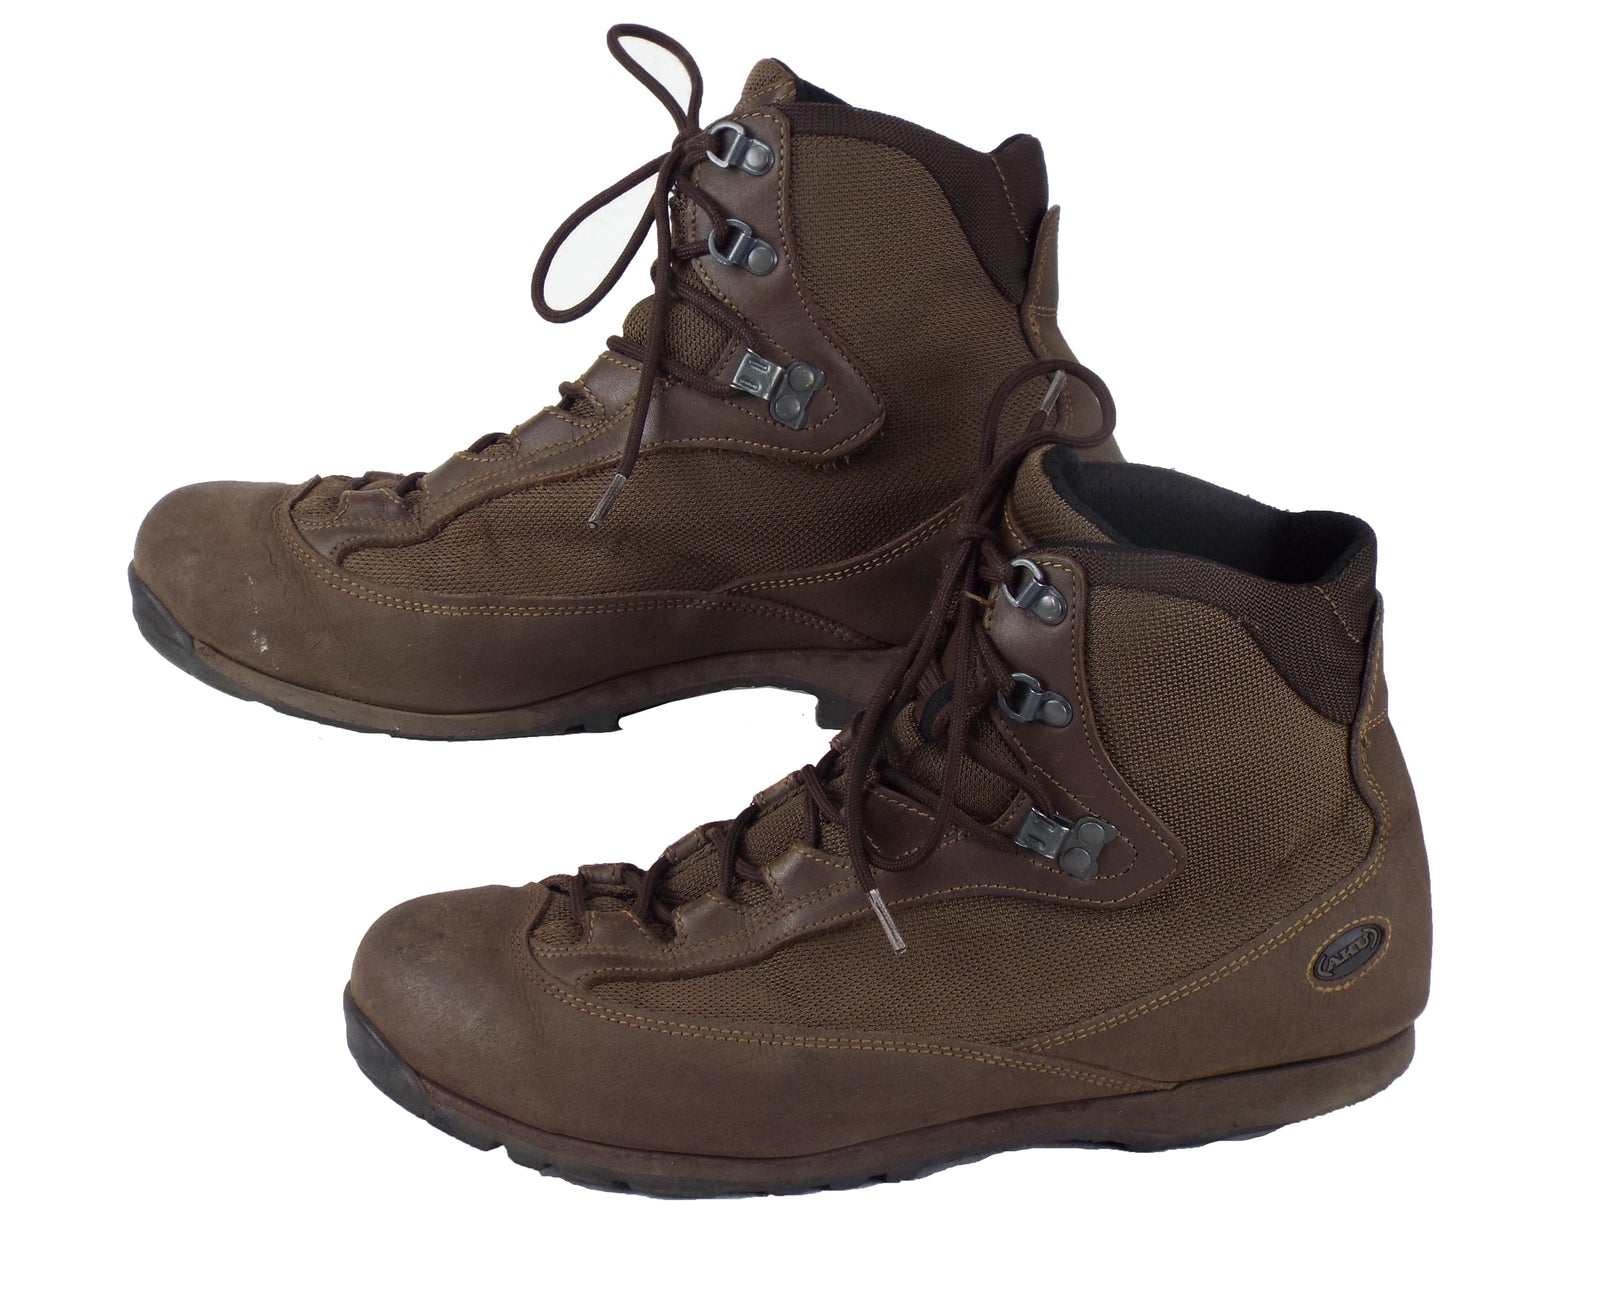 British Army Brown Boots – Bates - Grade 1 - Forces Uniform and Kit